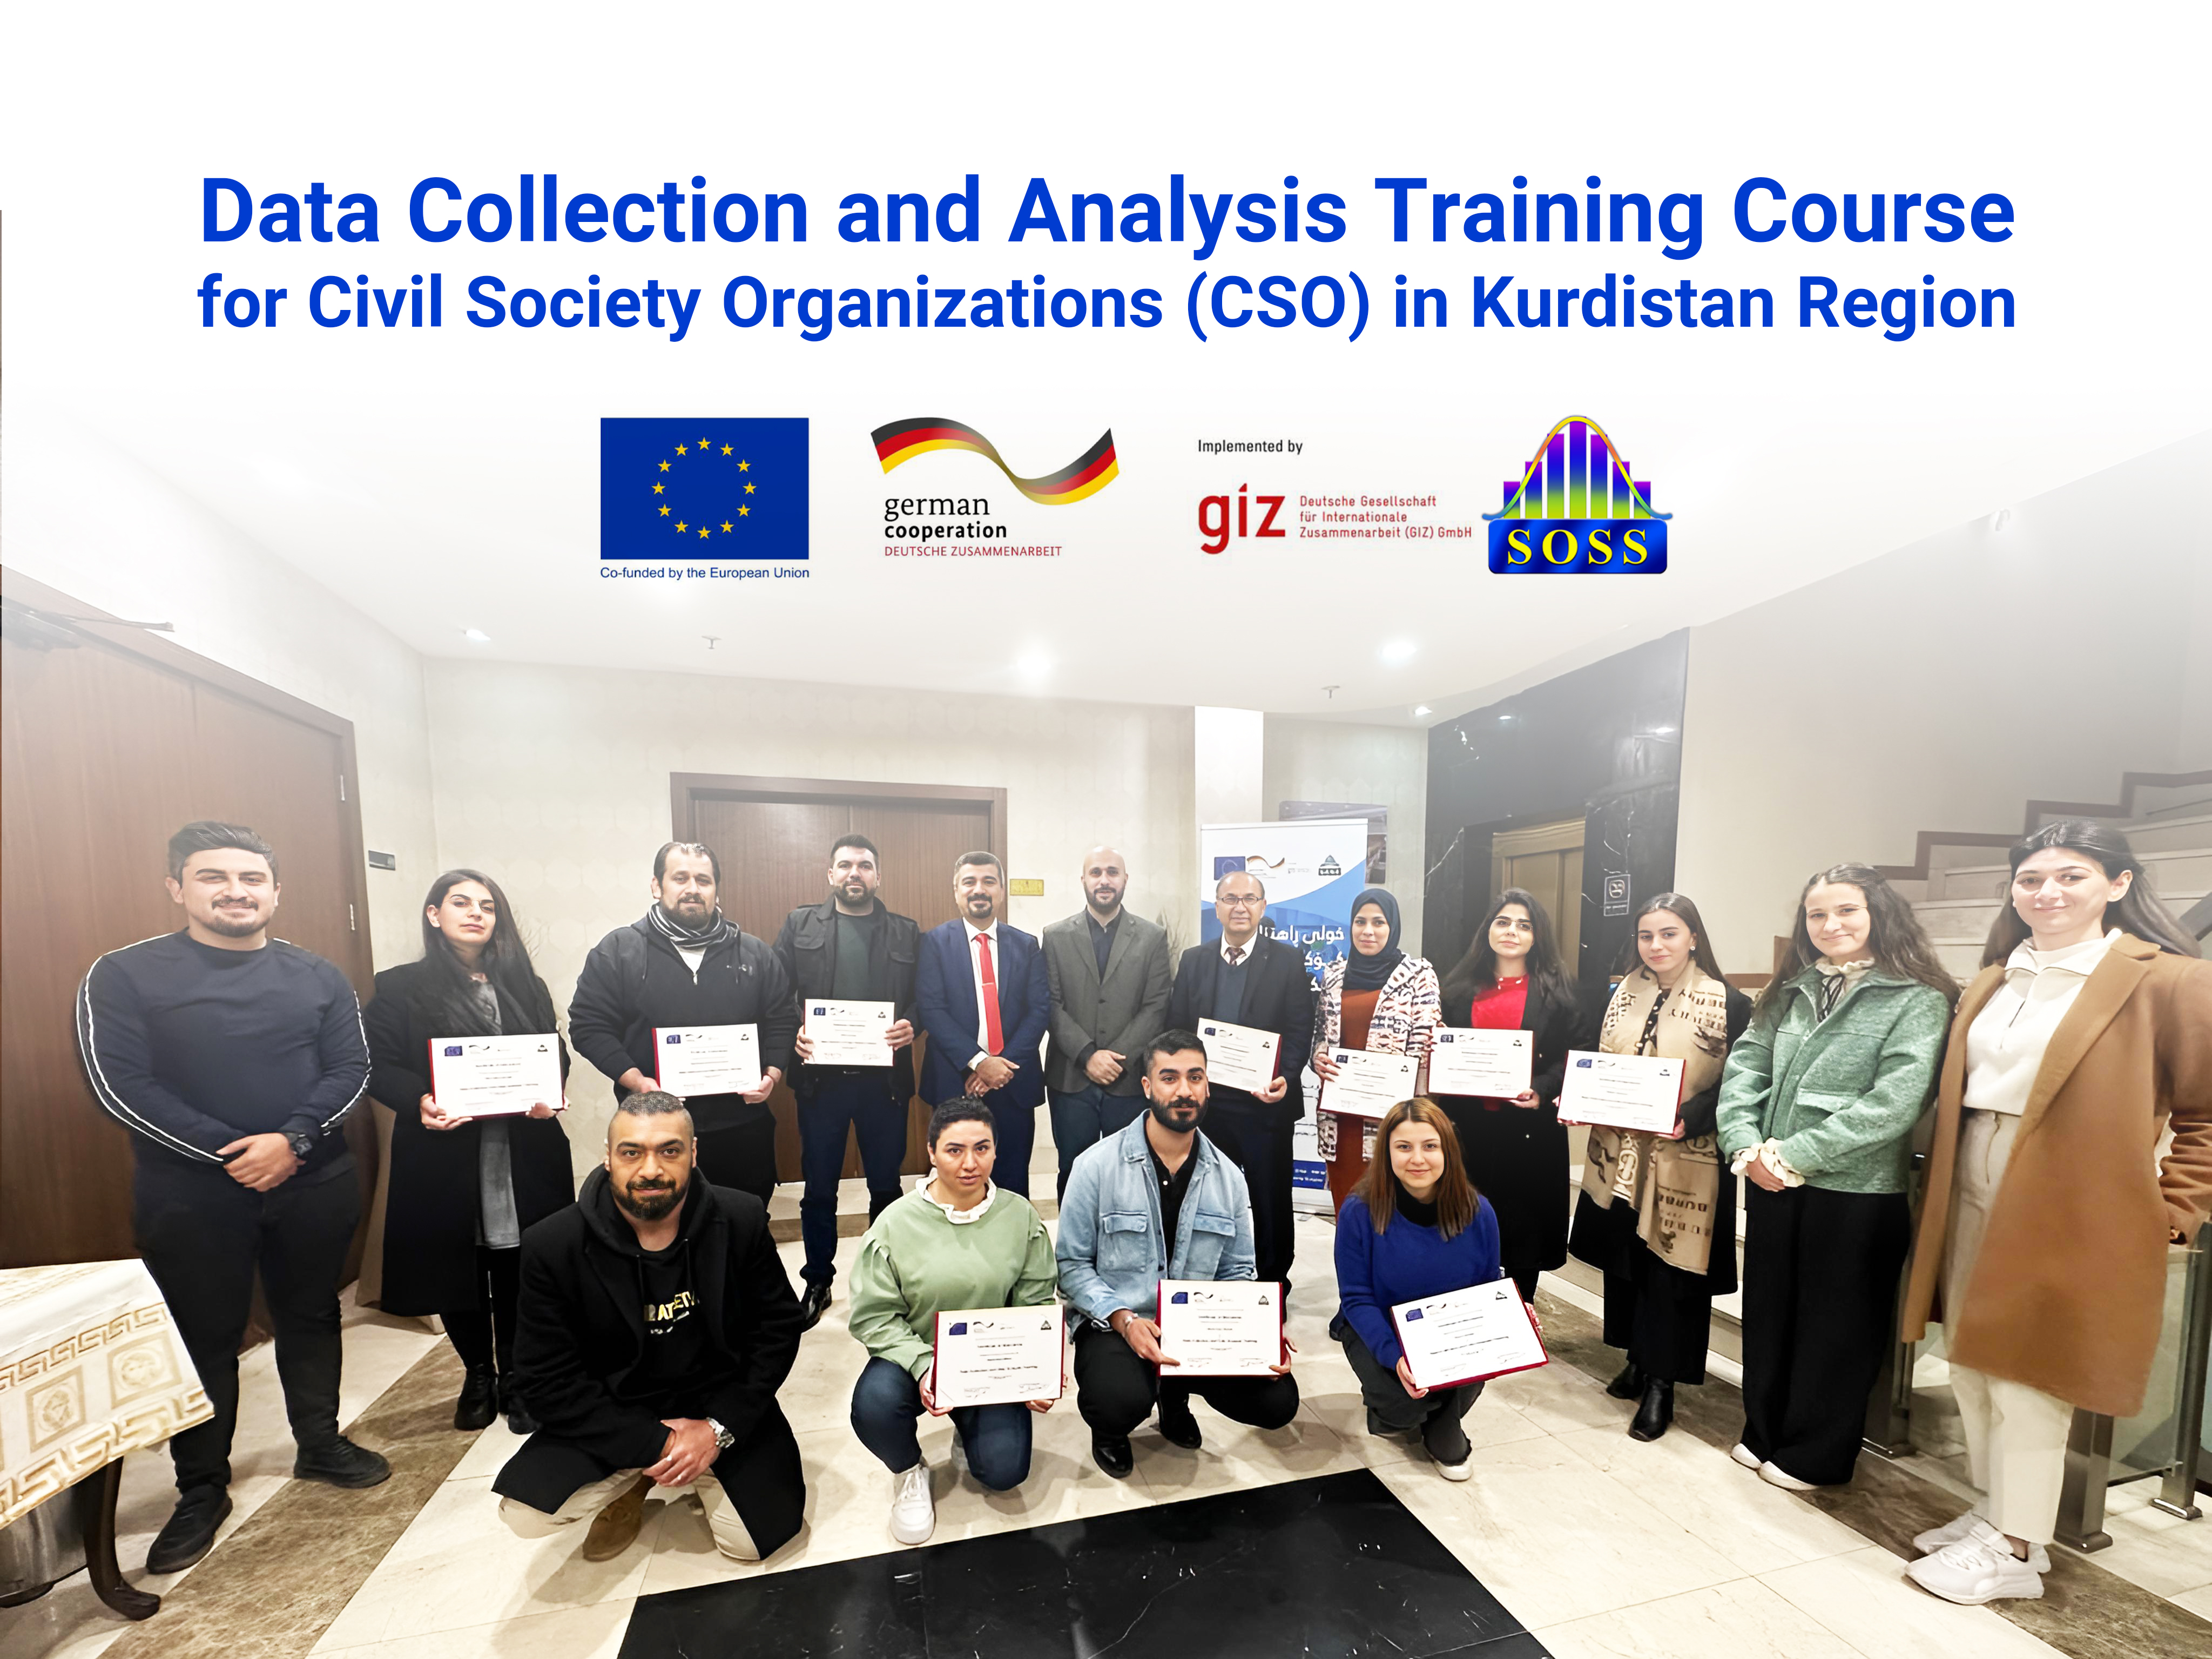 Data Collection and Analysis Training Course for Civil Society Organizations (CSO) in Kurdistan Region